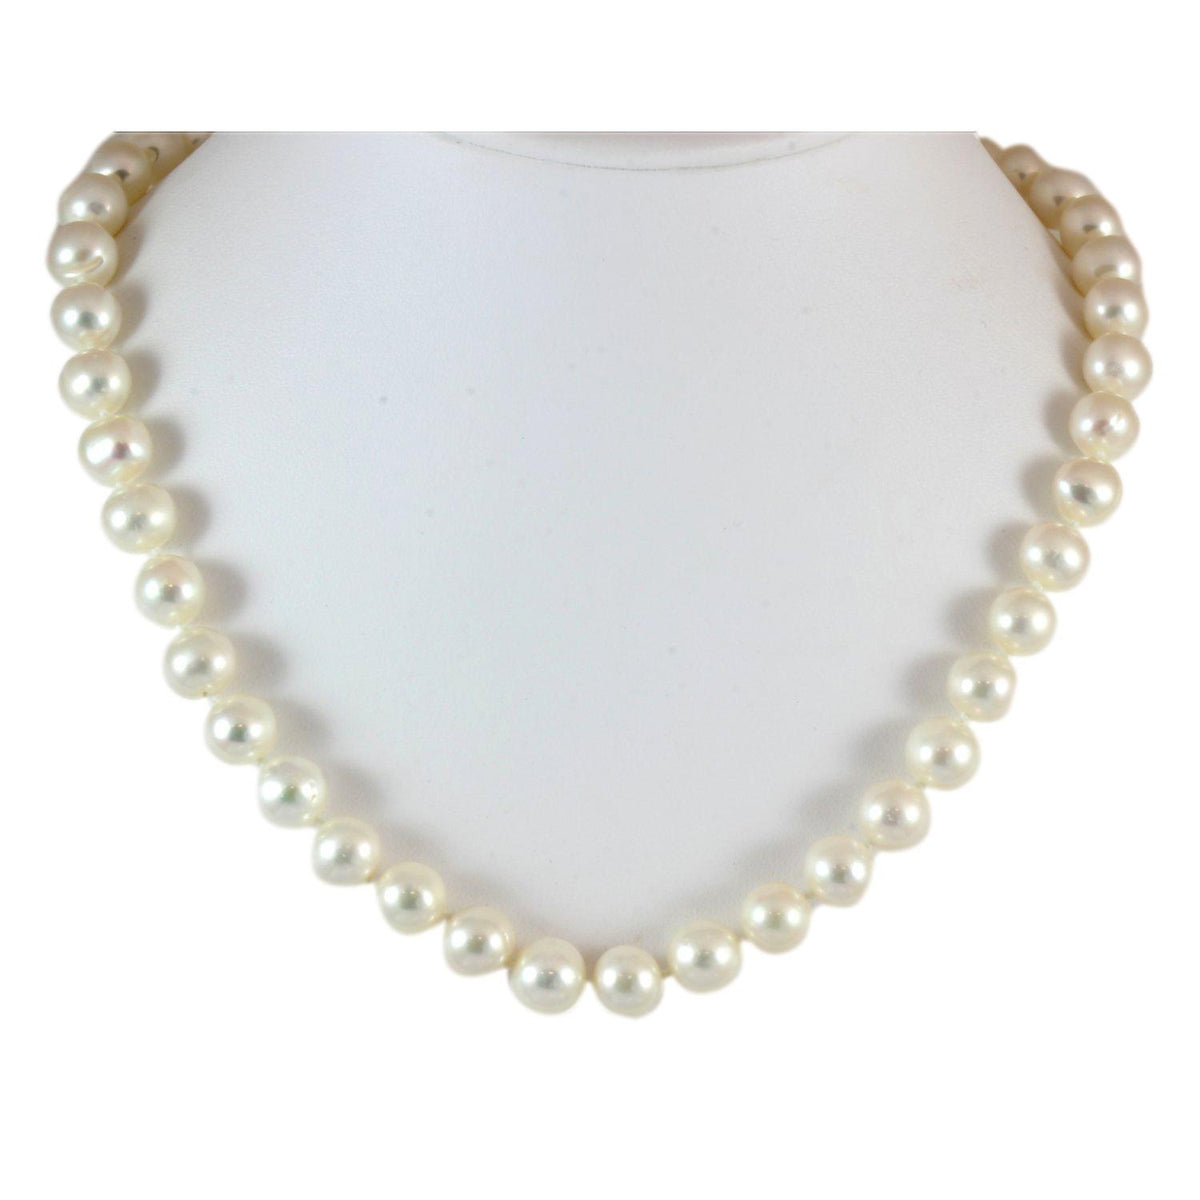 Handknotted 9mm Cultured Freshwater White Pearl Strand